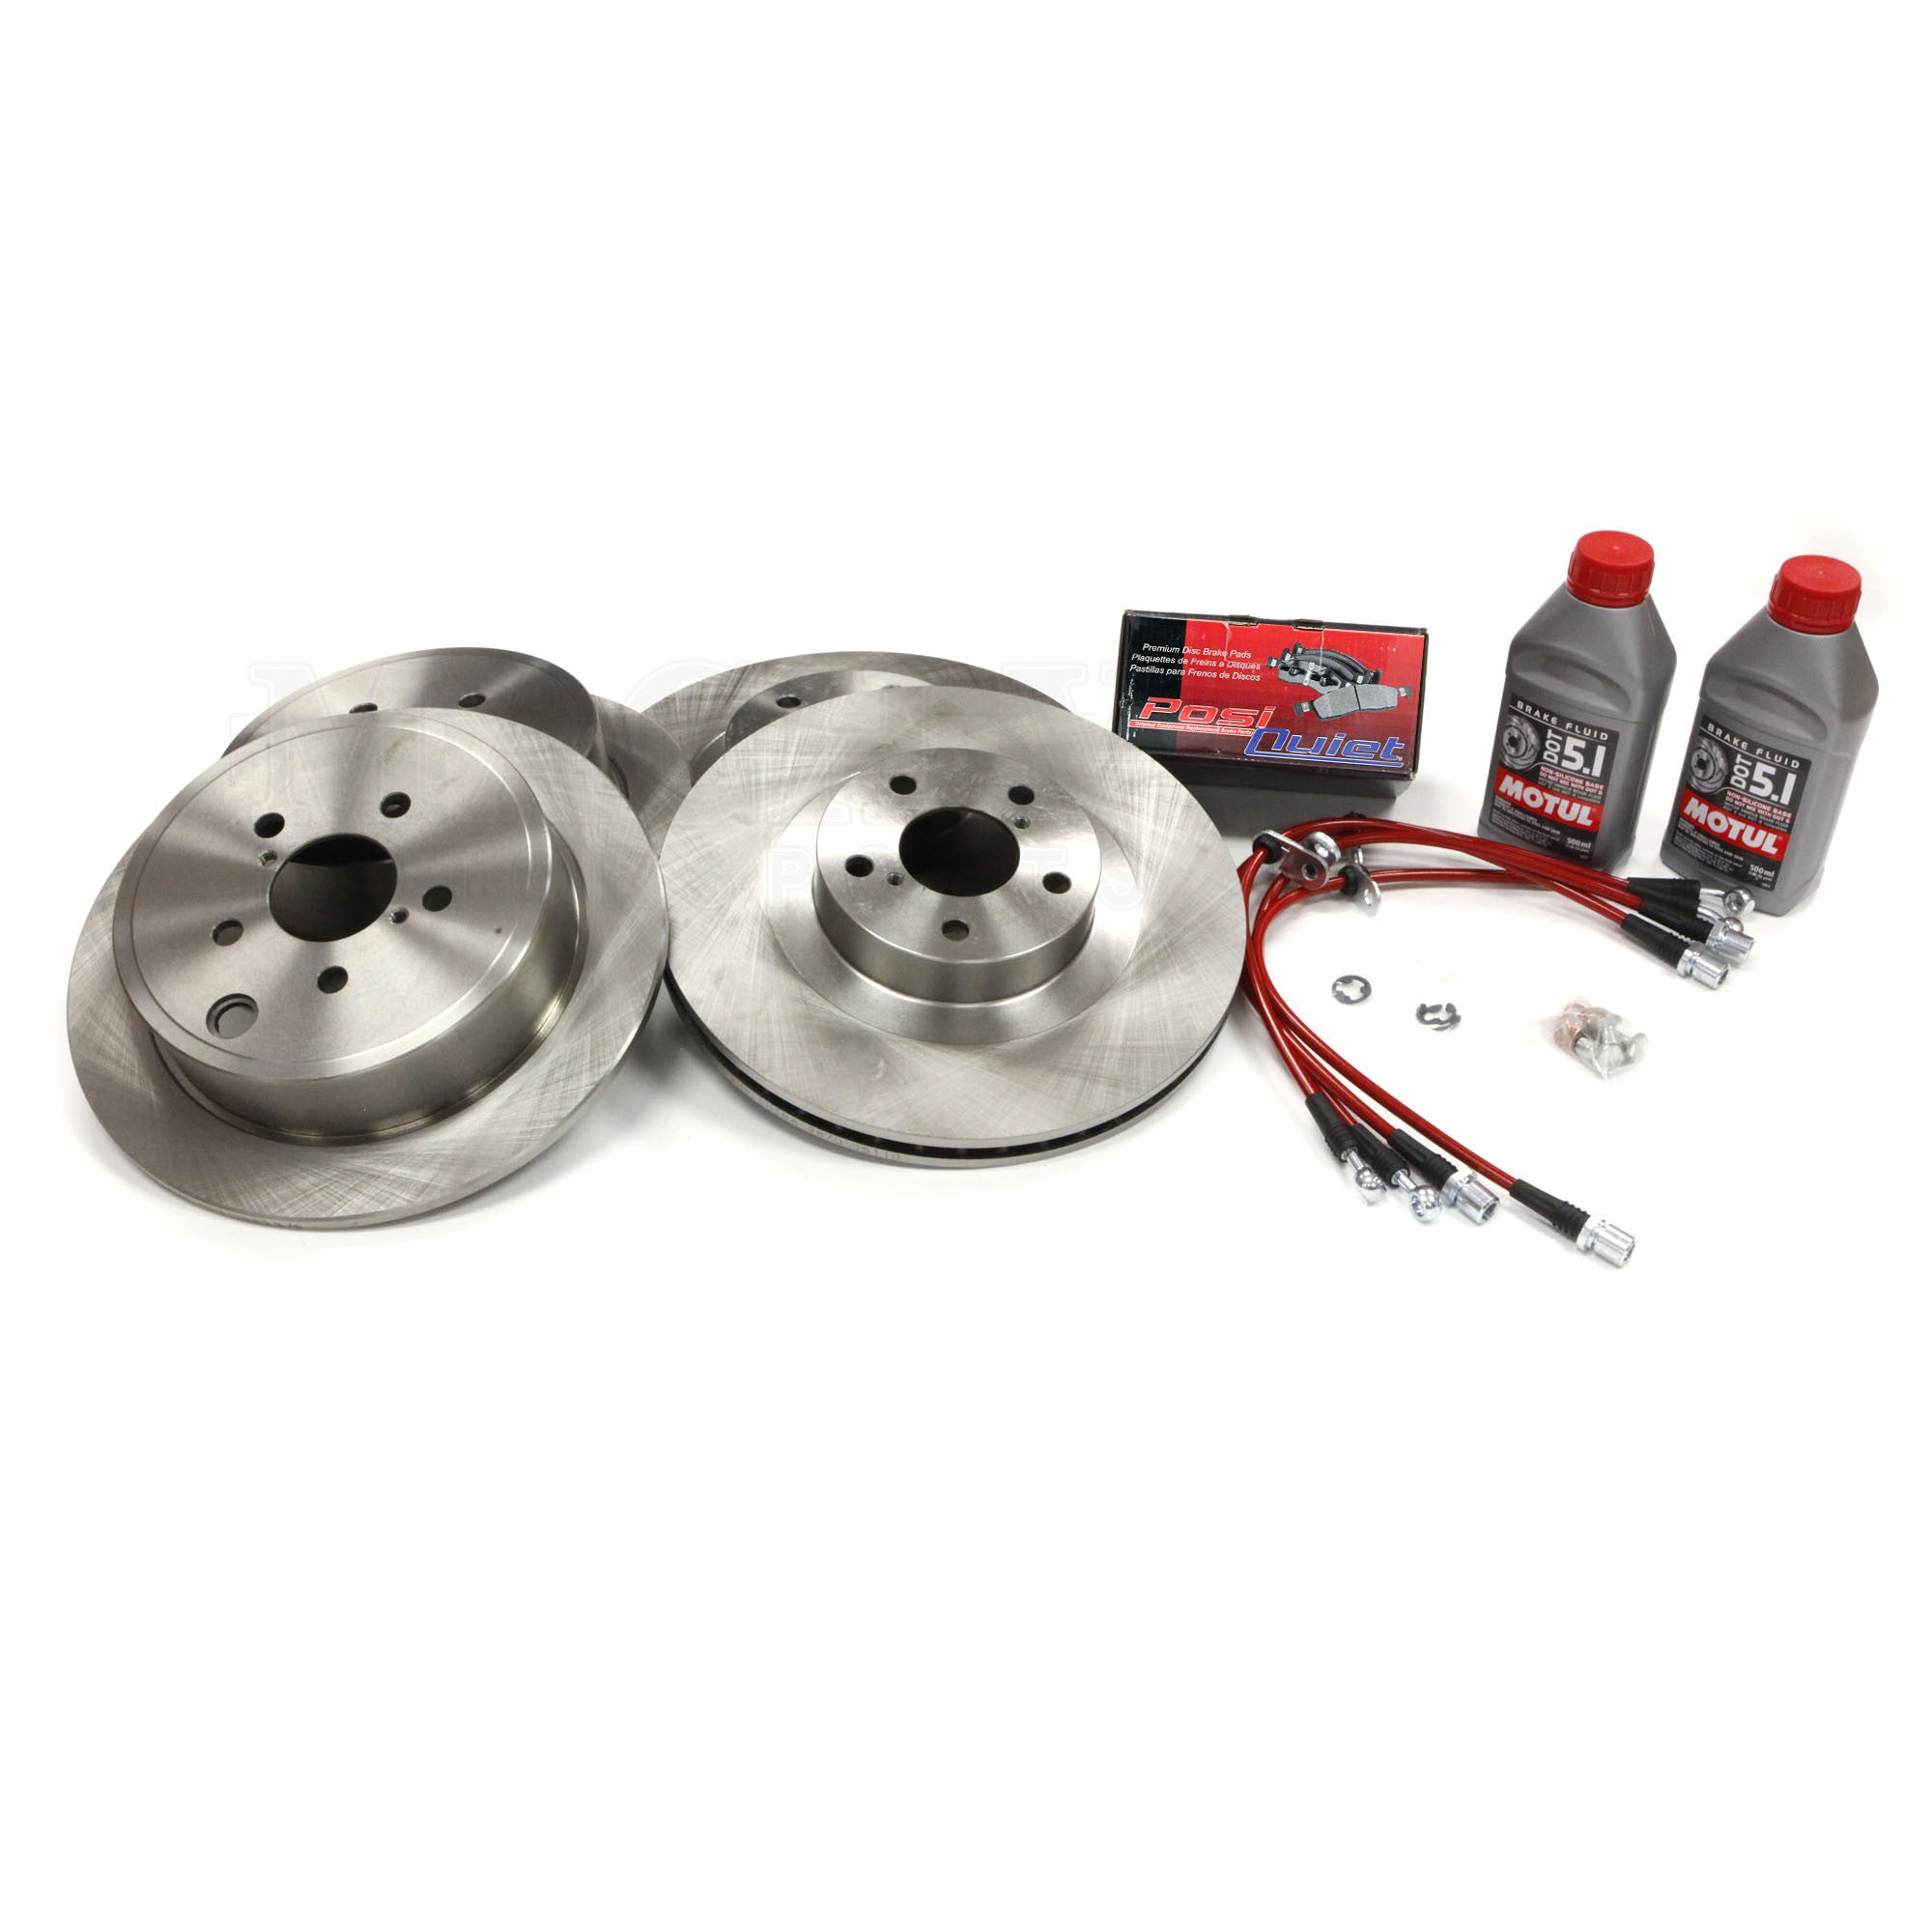 Brake Pad/Rotor Kit 2008-2014 WRX Front/Rear Complete